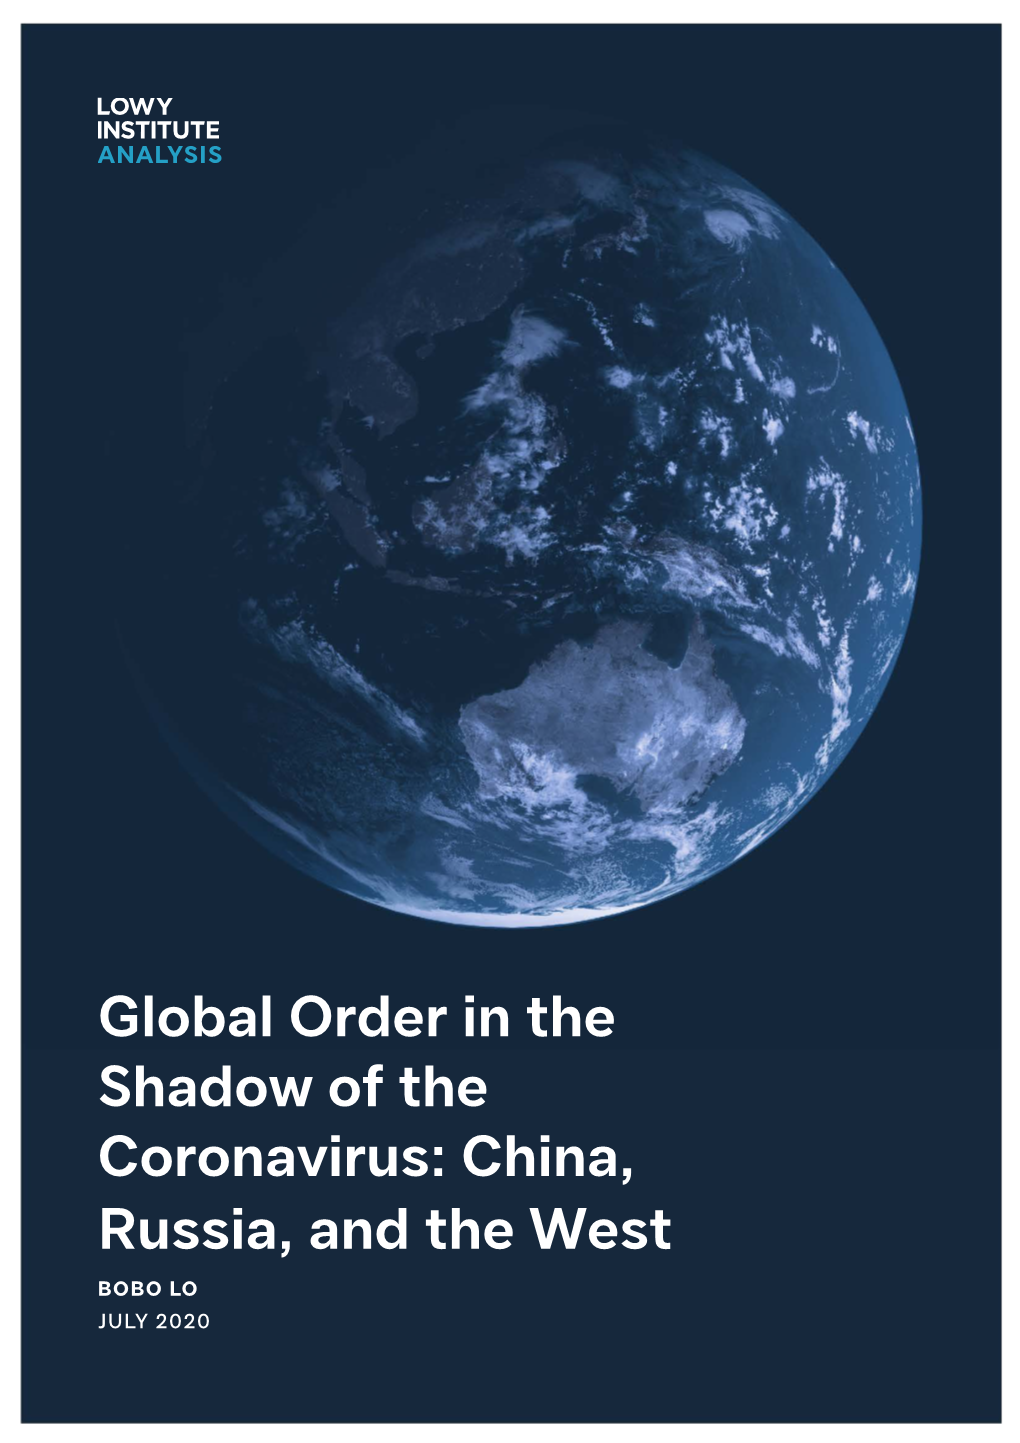 Global Order in the Shadow of the Coronavirus: China, Russia, and the West BOBO LO JULY 2020 GLOBAL ORDER in the SHADOW of the CORONAVIRUS